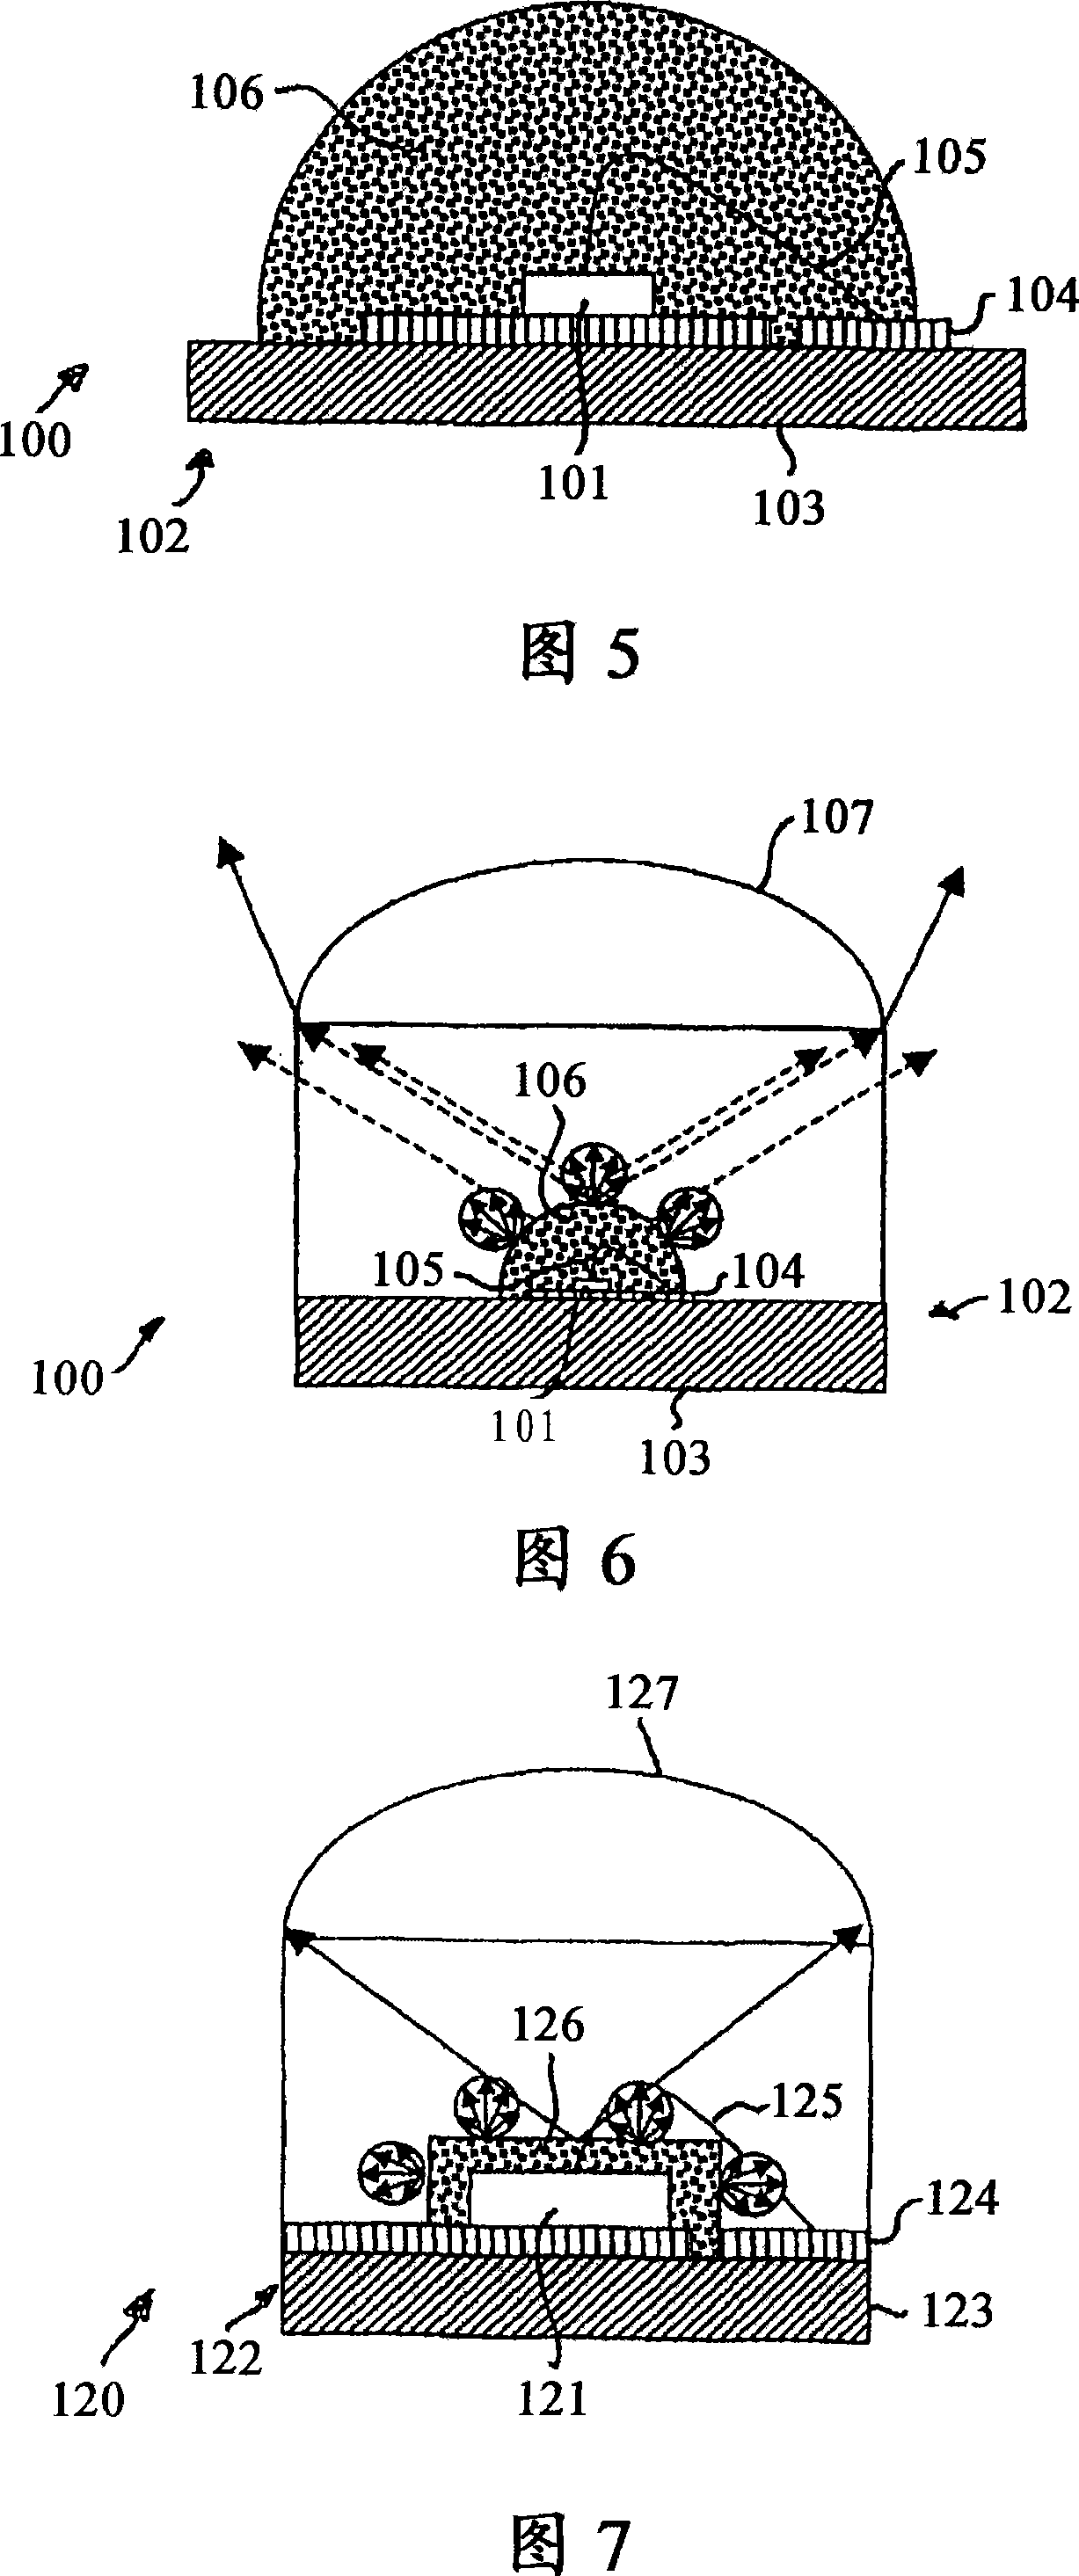 Light-emitting diode arrangement comprising a color-converting material